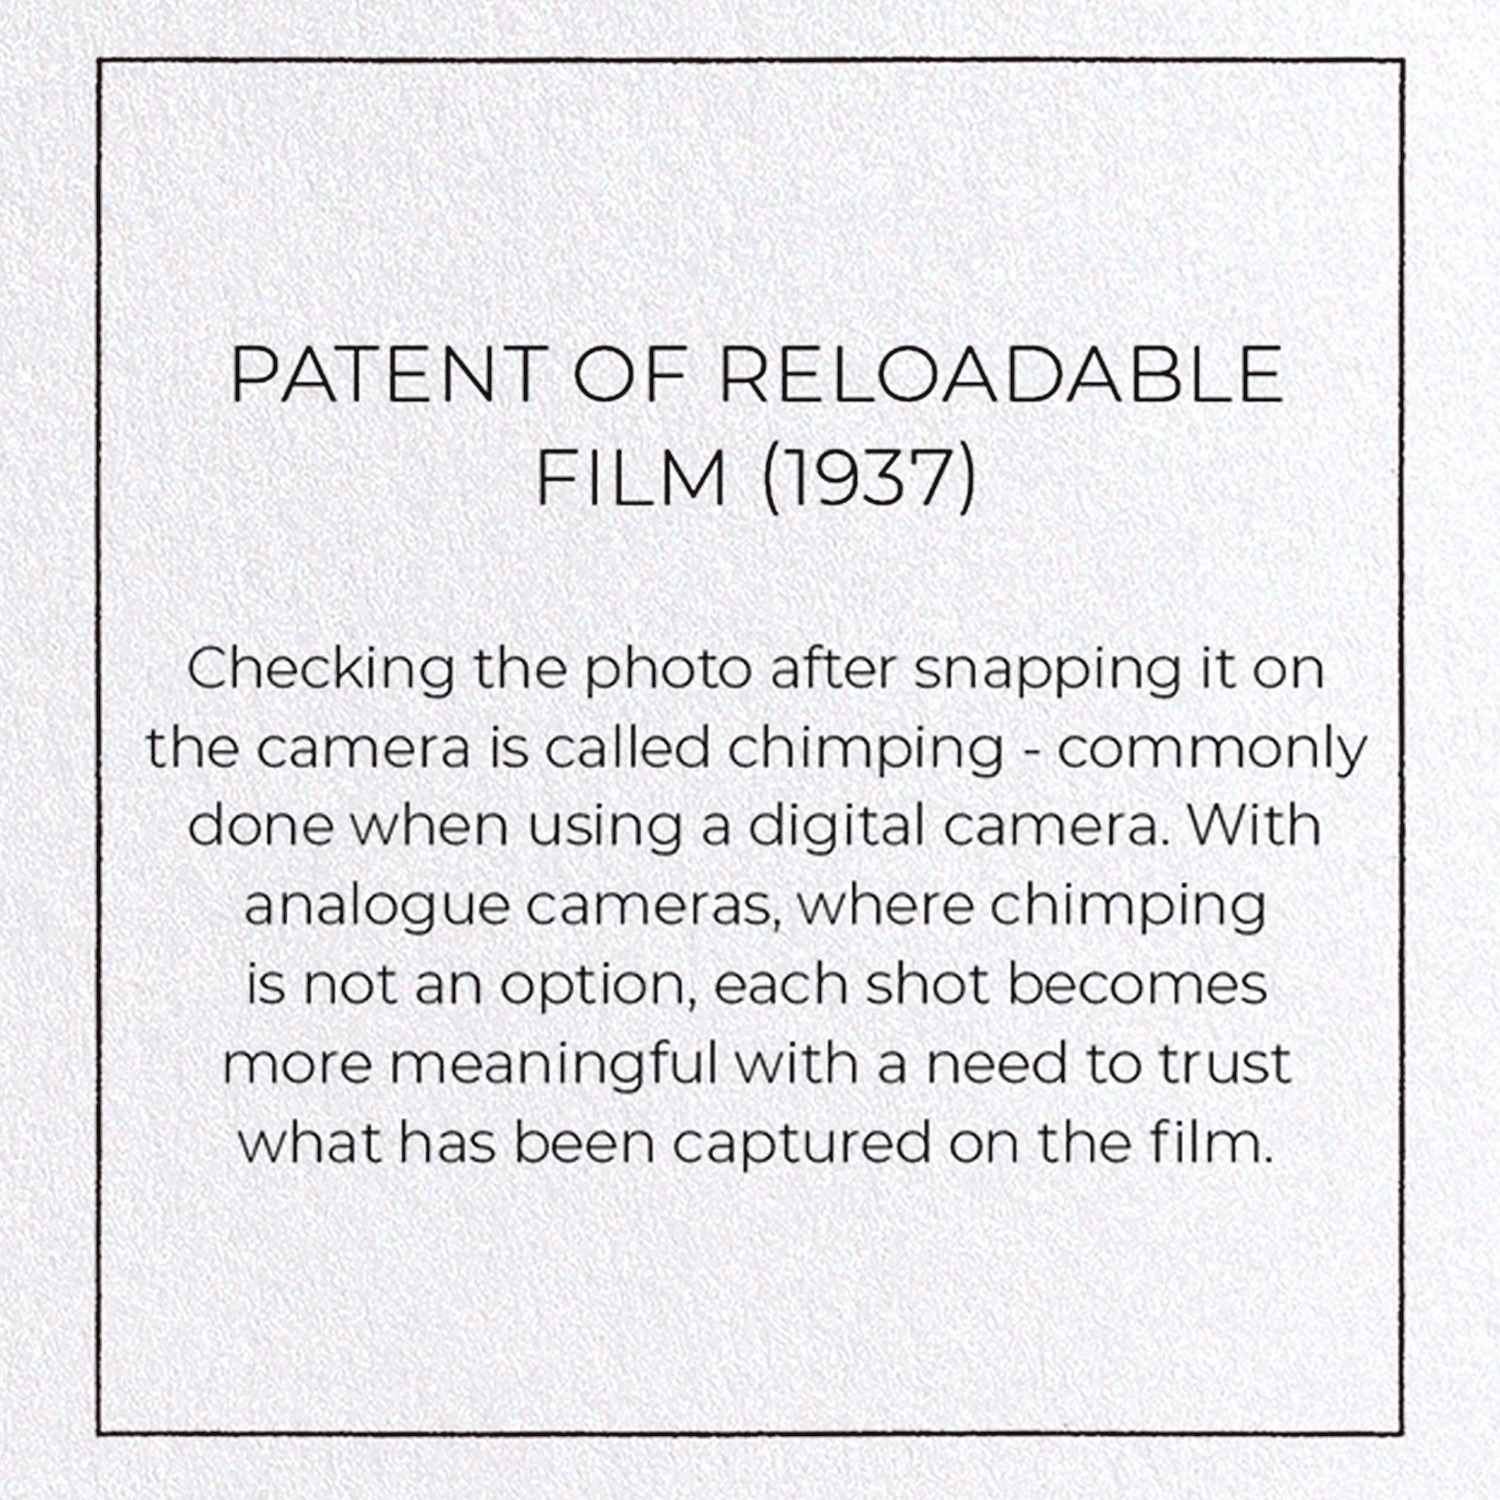 PATENT OF RELOADABLE FILM (1937): Patent Greeting Card